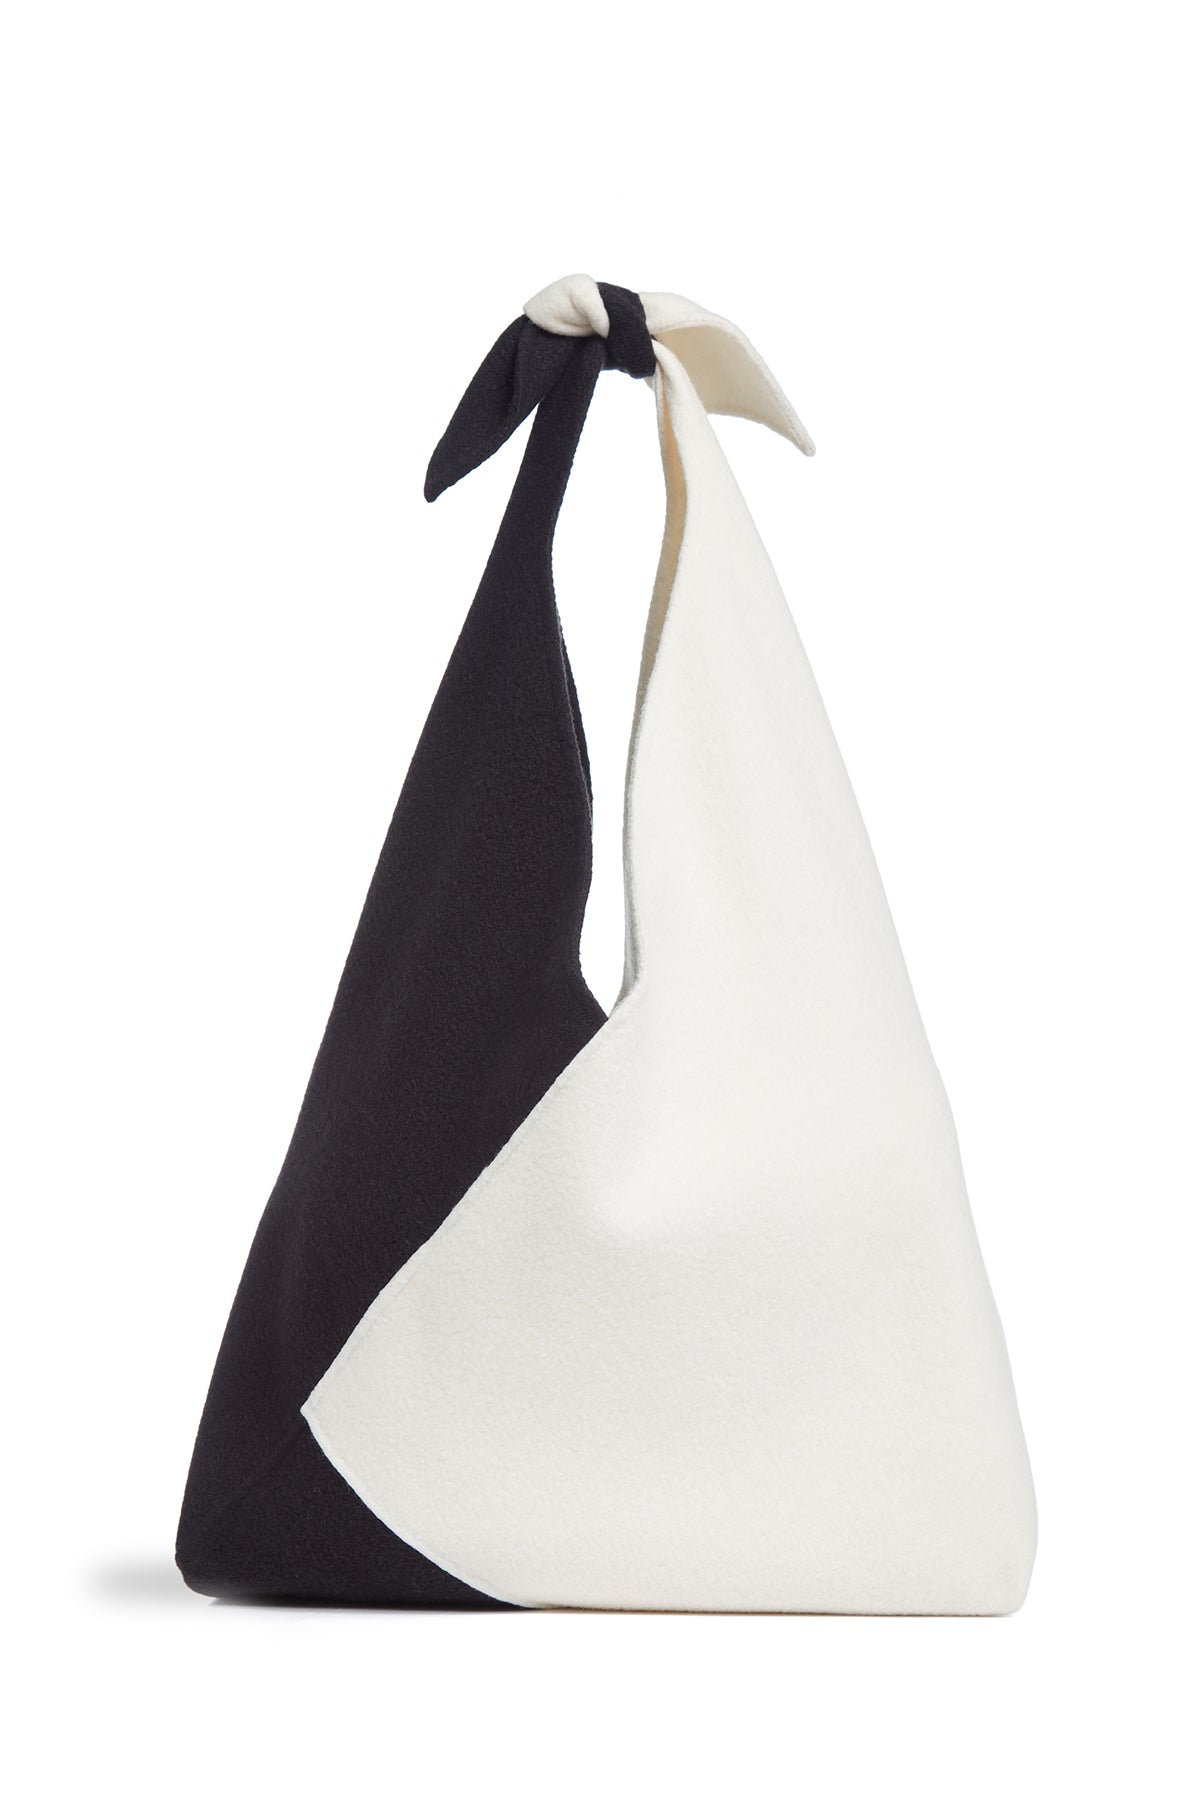 Meet Hildegard Tote from Gabriela Hearst -- Recycled, Sustainable Cashmere  — Anne of Carversville